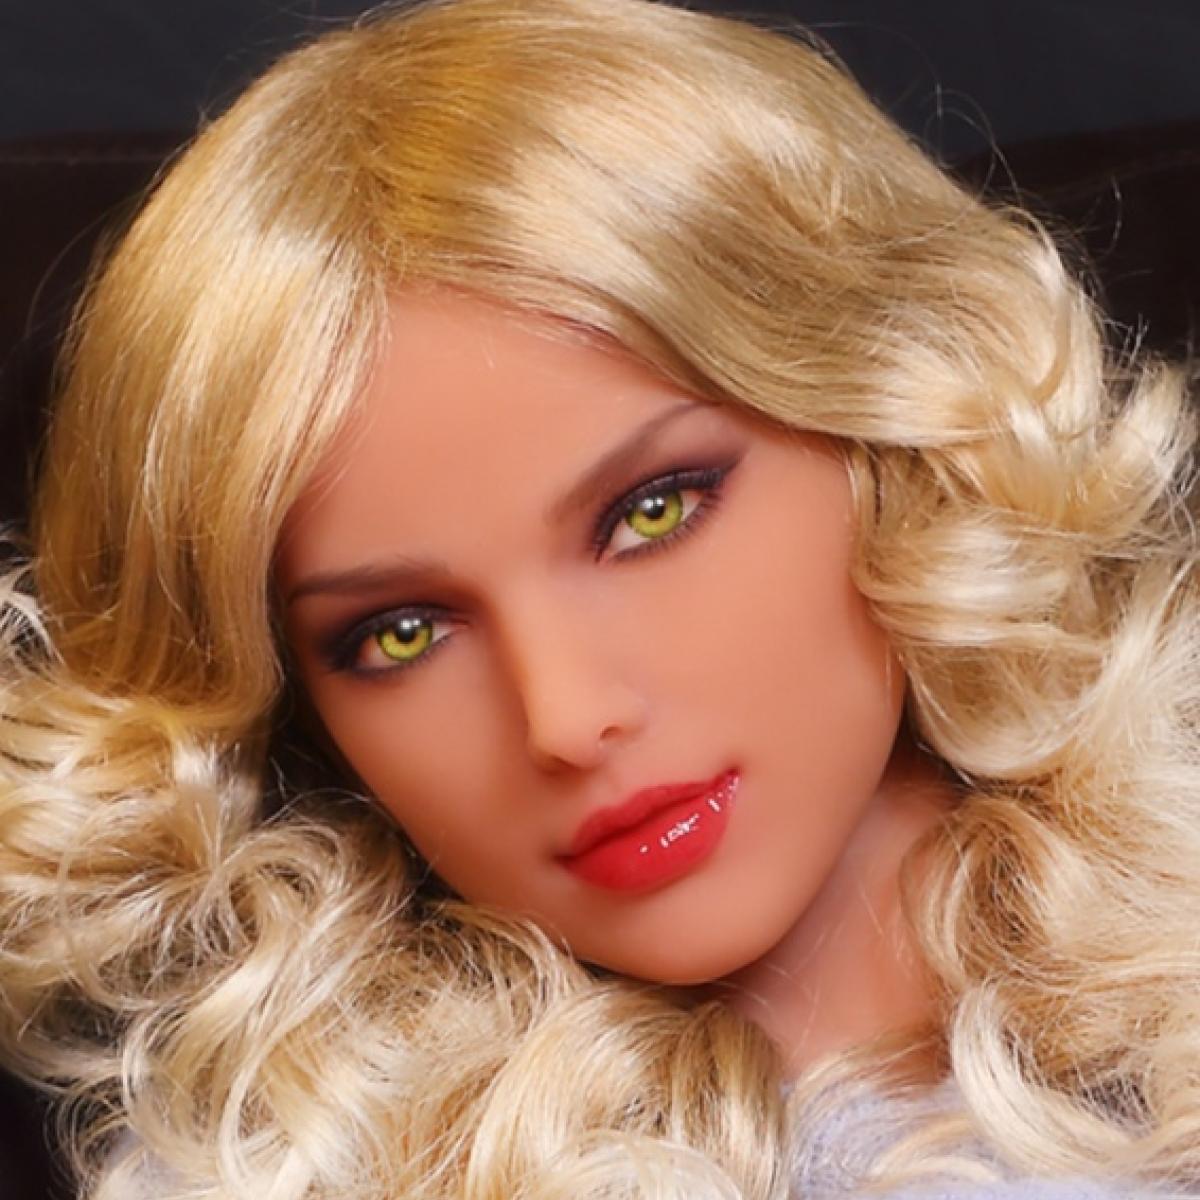 Firedoll - Holly - Sex Doll Head - M16 Compatible - Light Tan